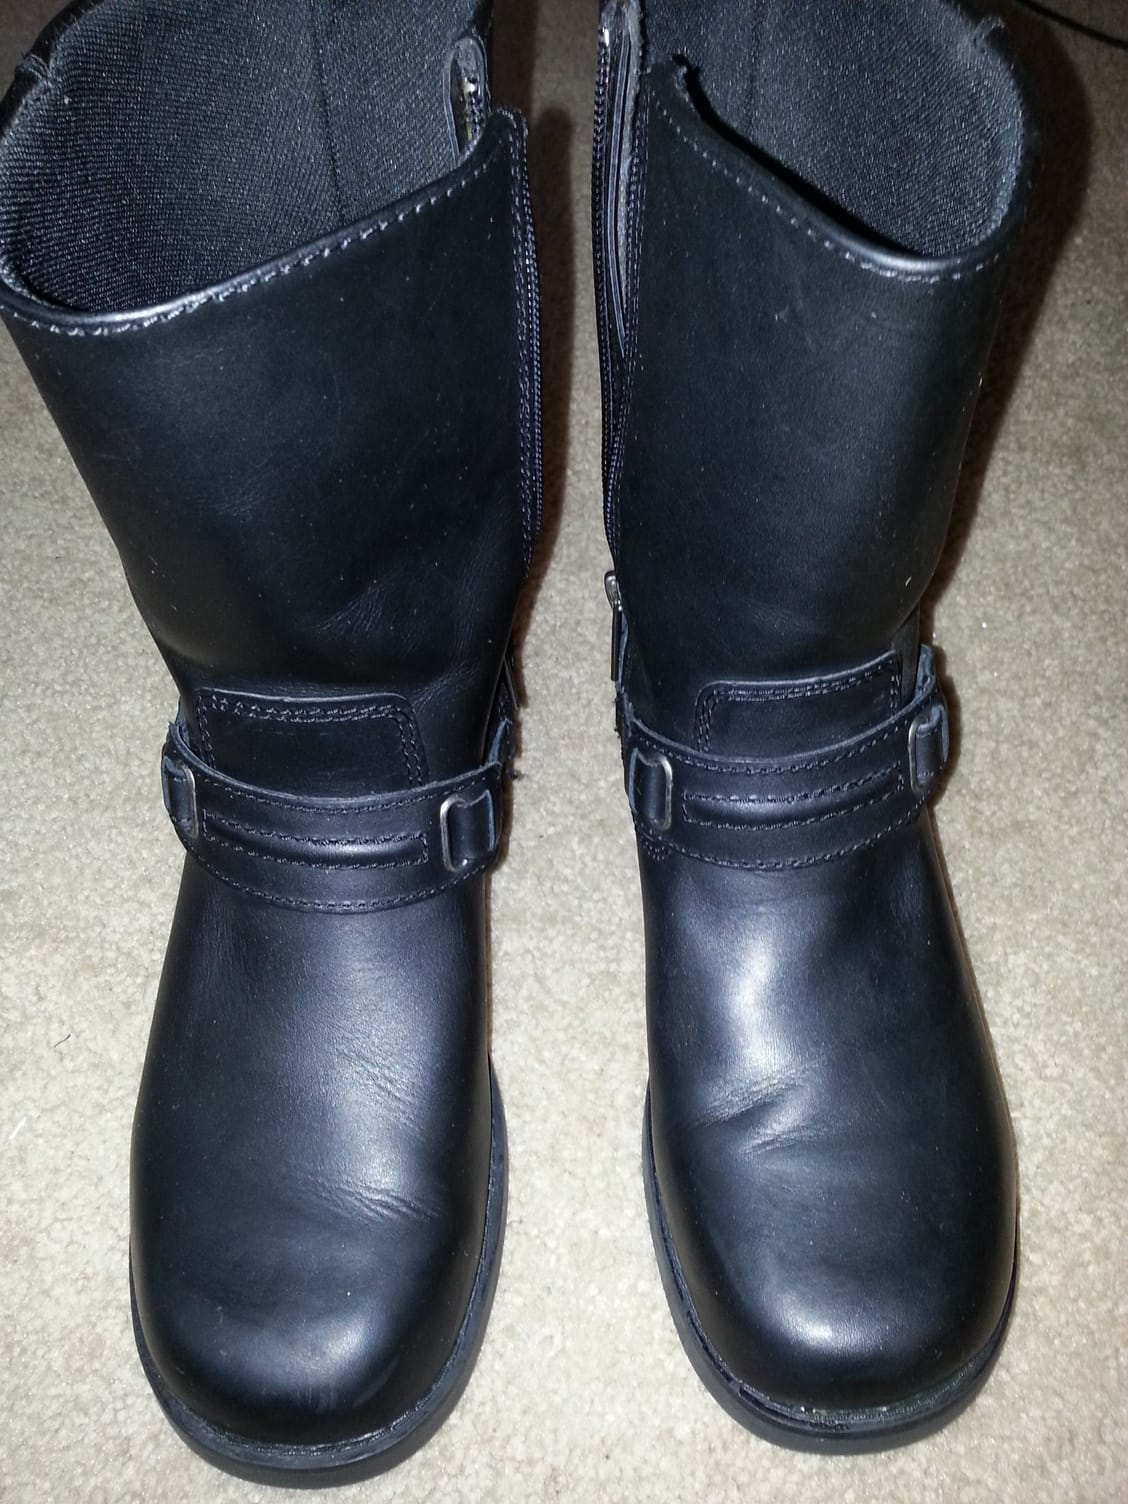 Harley womens Christa boots size 91/2 - Harley Davidson Forums